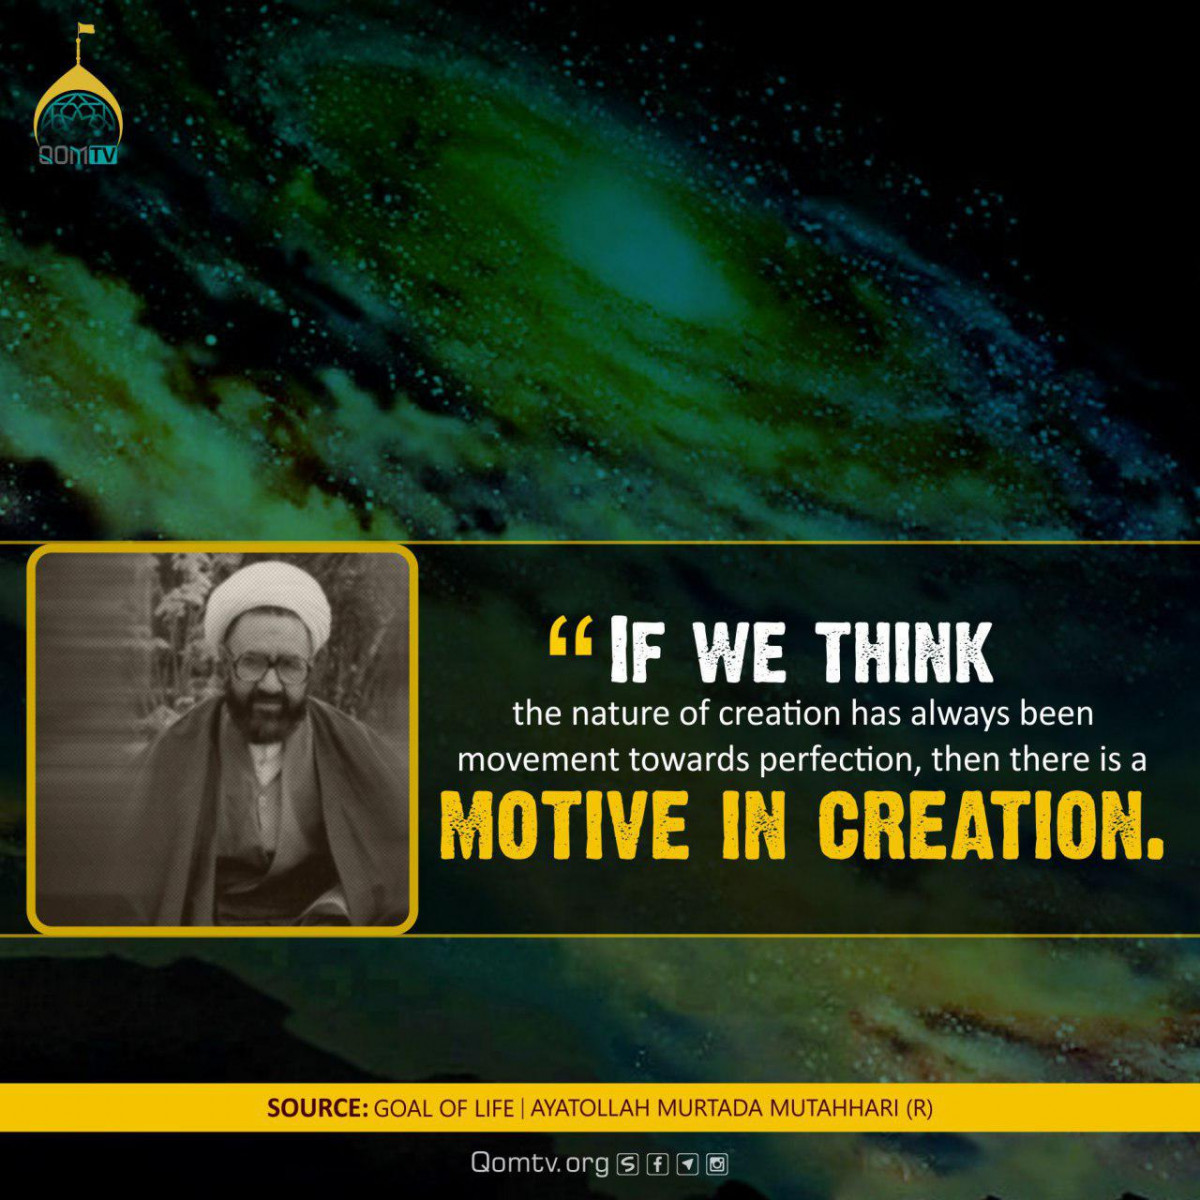 then there is a motive in creation